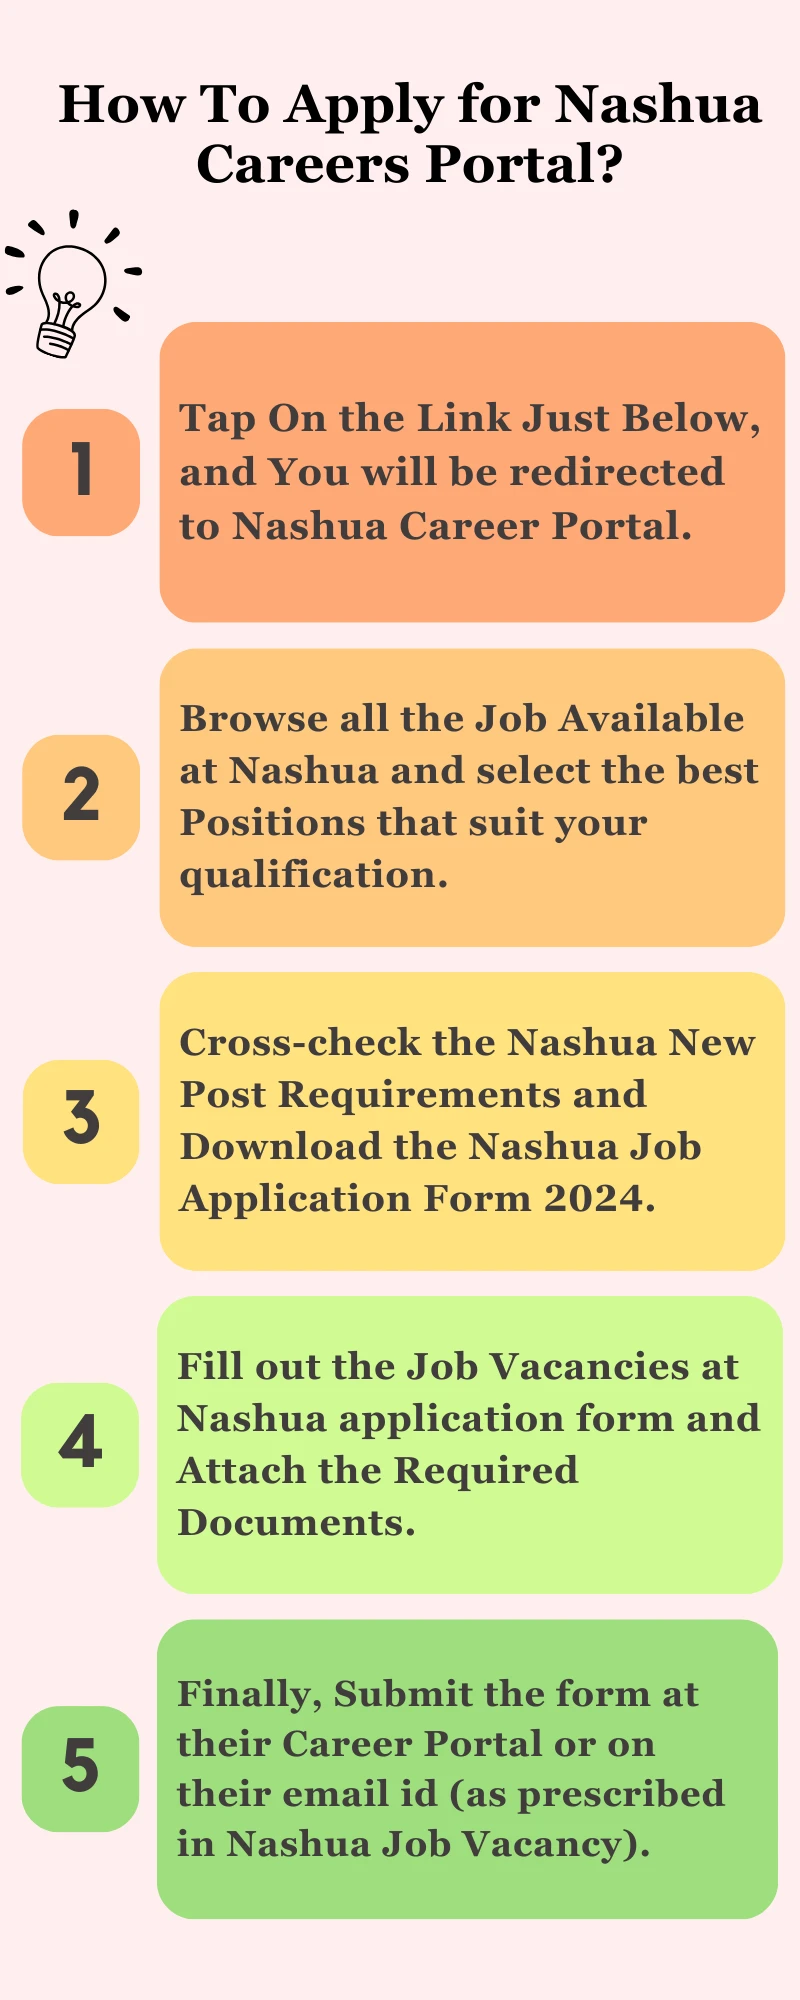 How To Apply for Nashua Careers Portal?